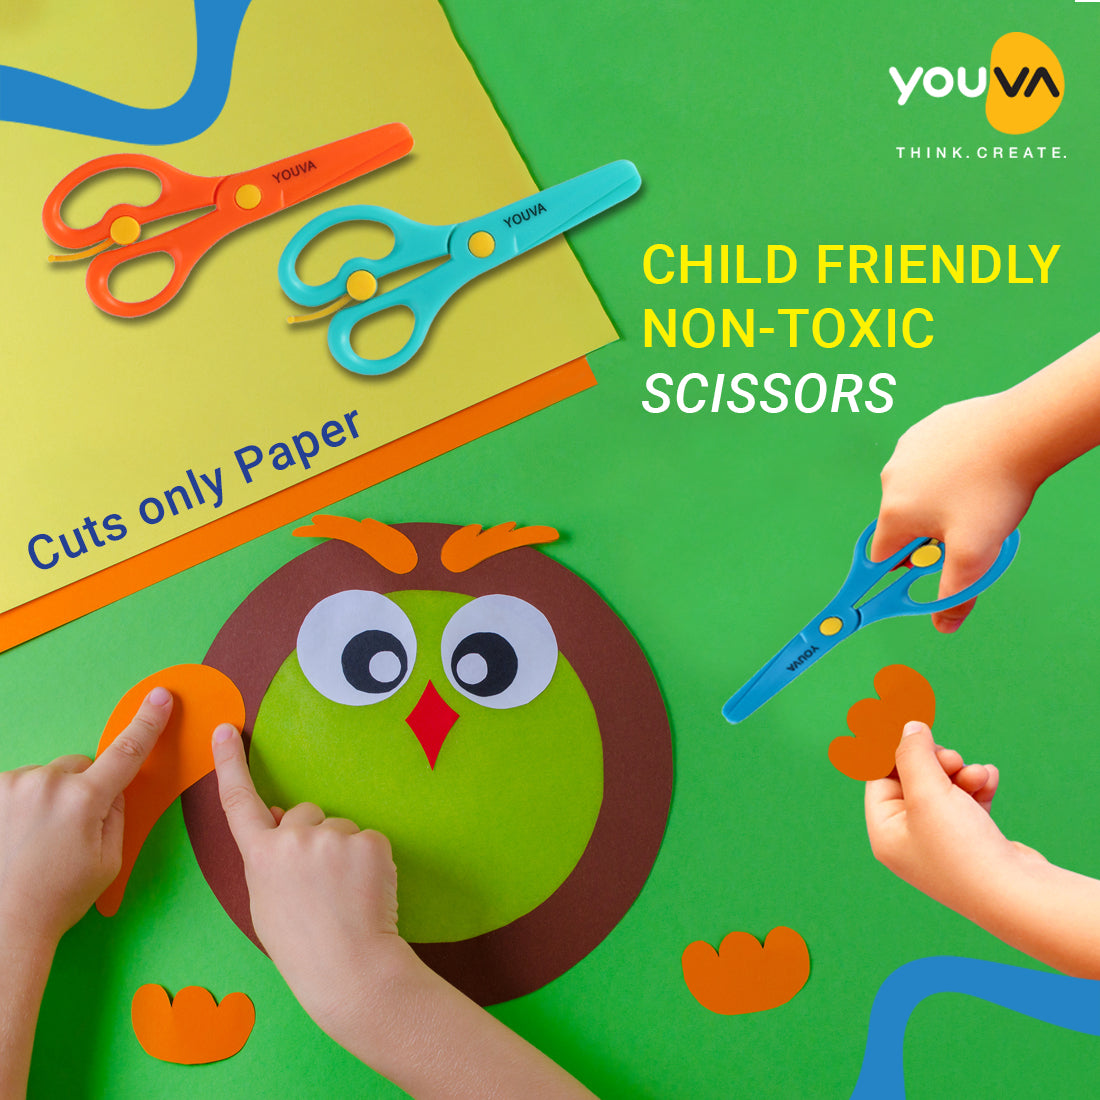 Navneet Youva | Scissors Assorted Colour for smaller kids | Pack of 1 | 3 Colours - Green, Orange, Blue | Safe for kids of the age group 3-6 years